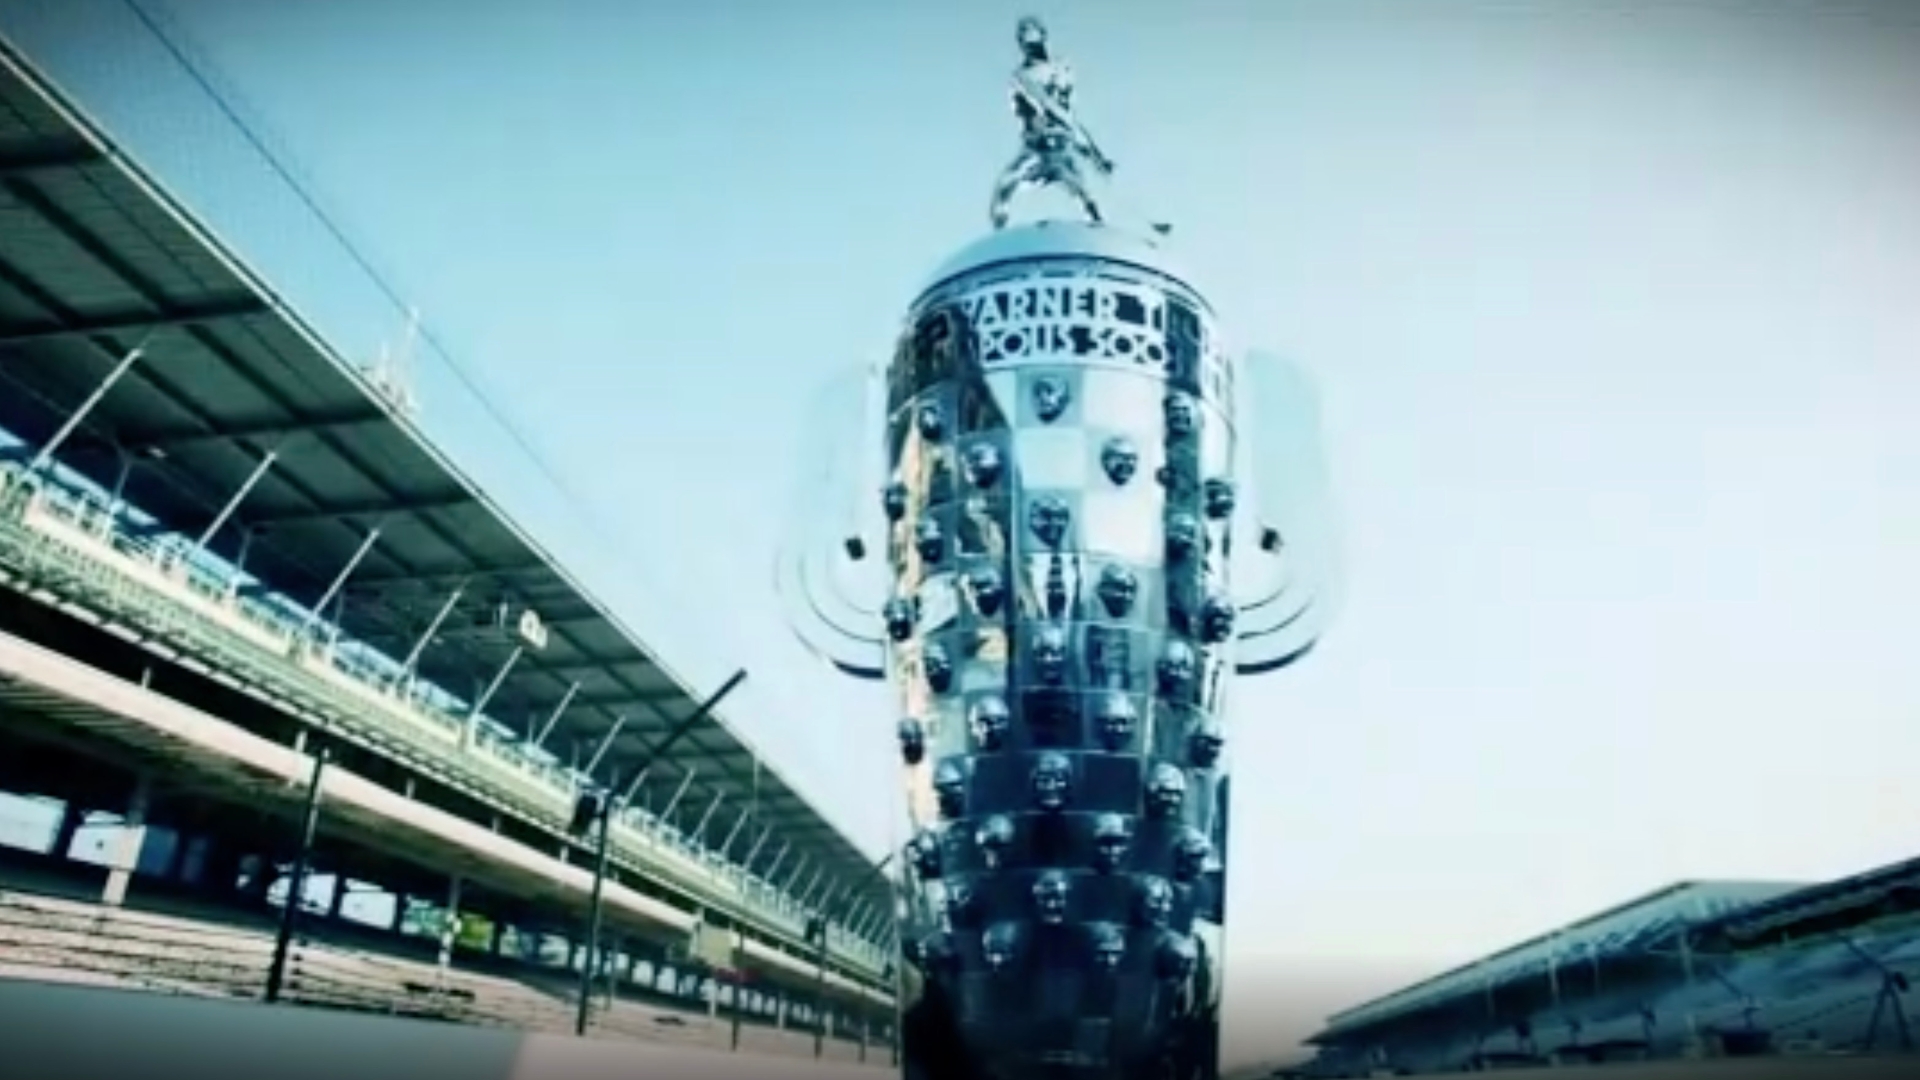 Coronavirus can't stop the Indy 500